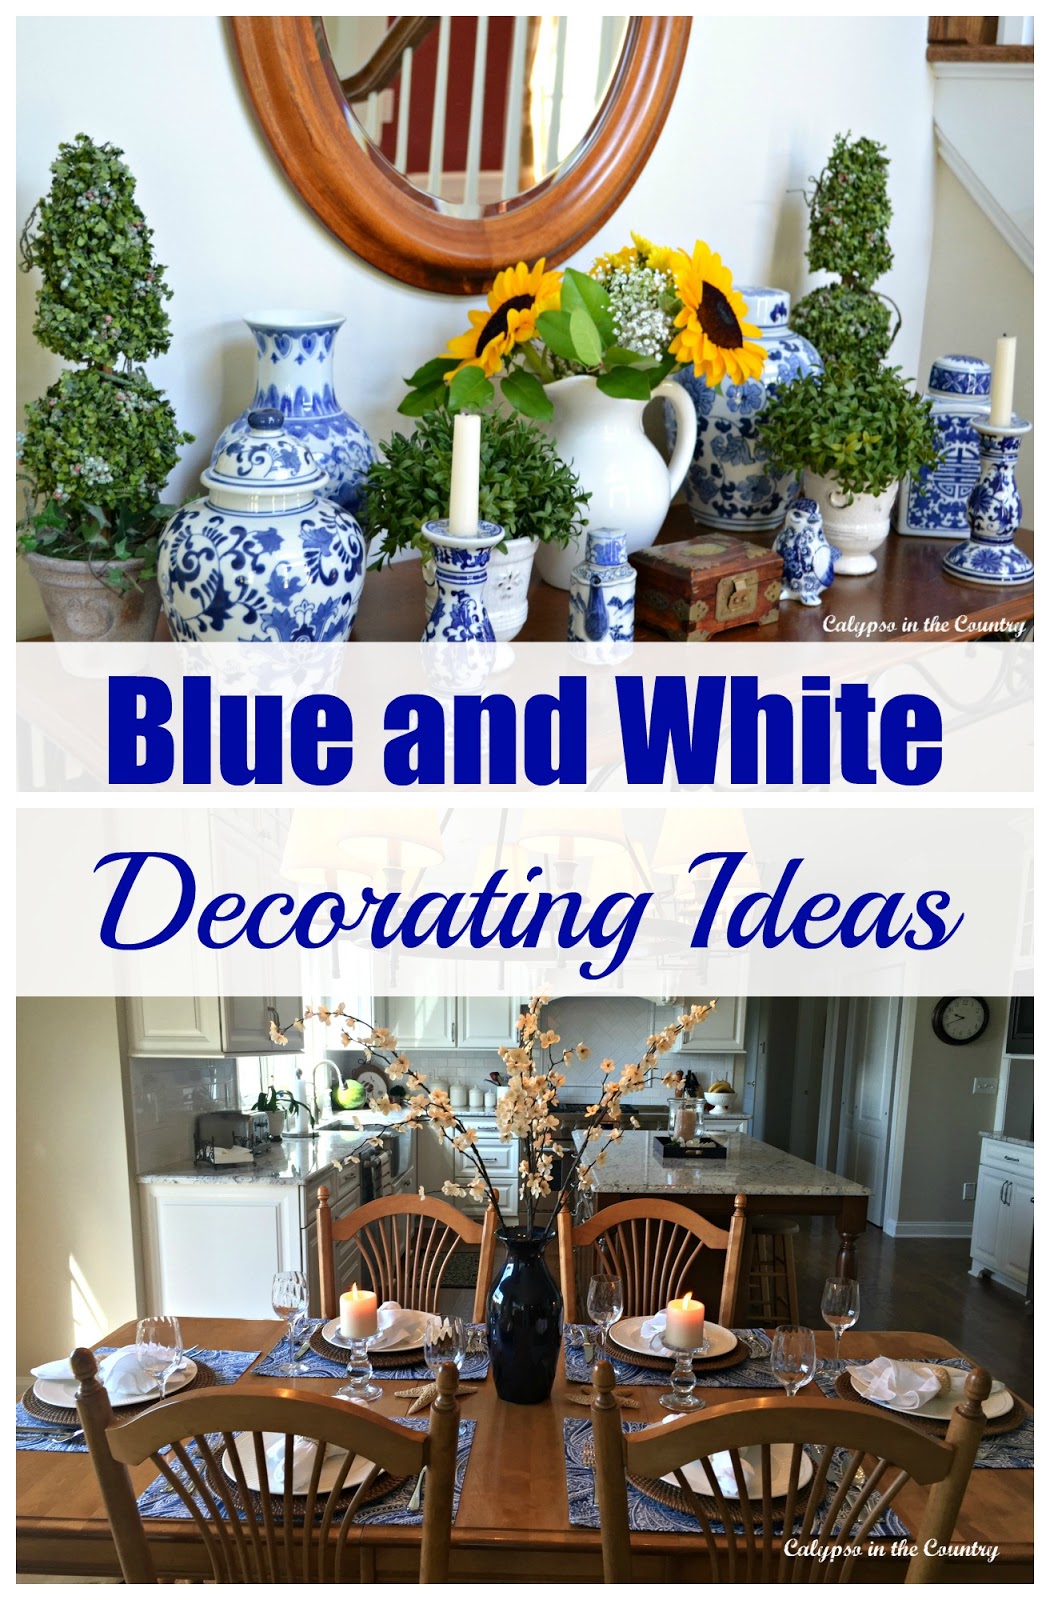 Blue and White Decorating Ideas